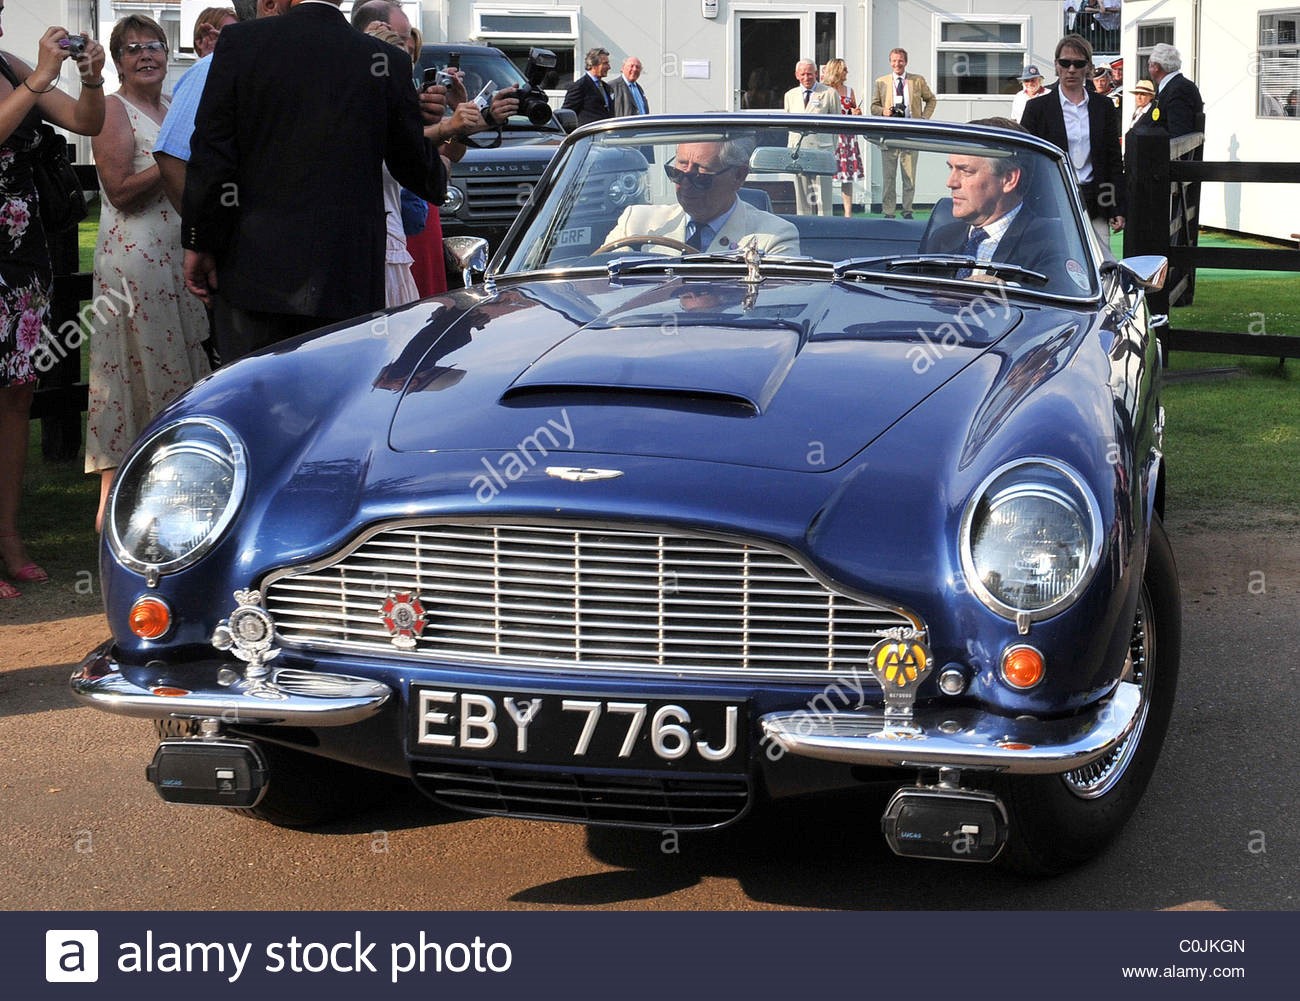 Prince Charles drives away in his wine powered Aston Martin Cartier International Polo tournament held at the Guards Polo Club.